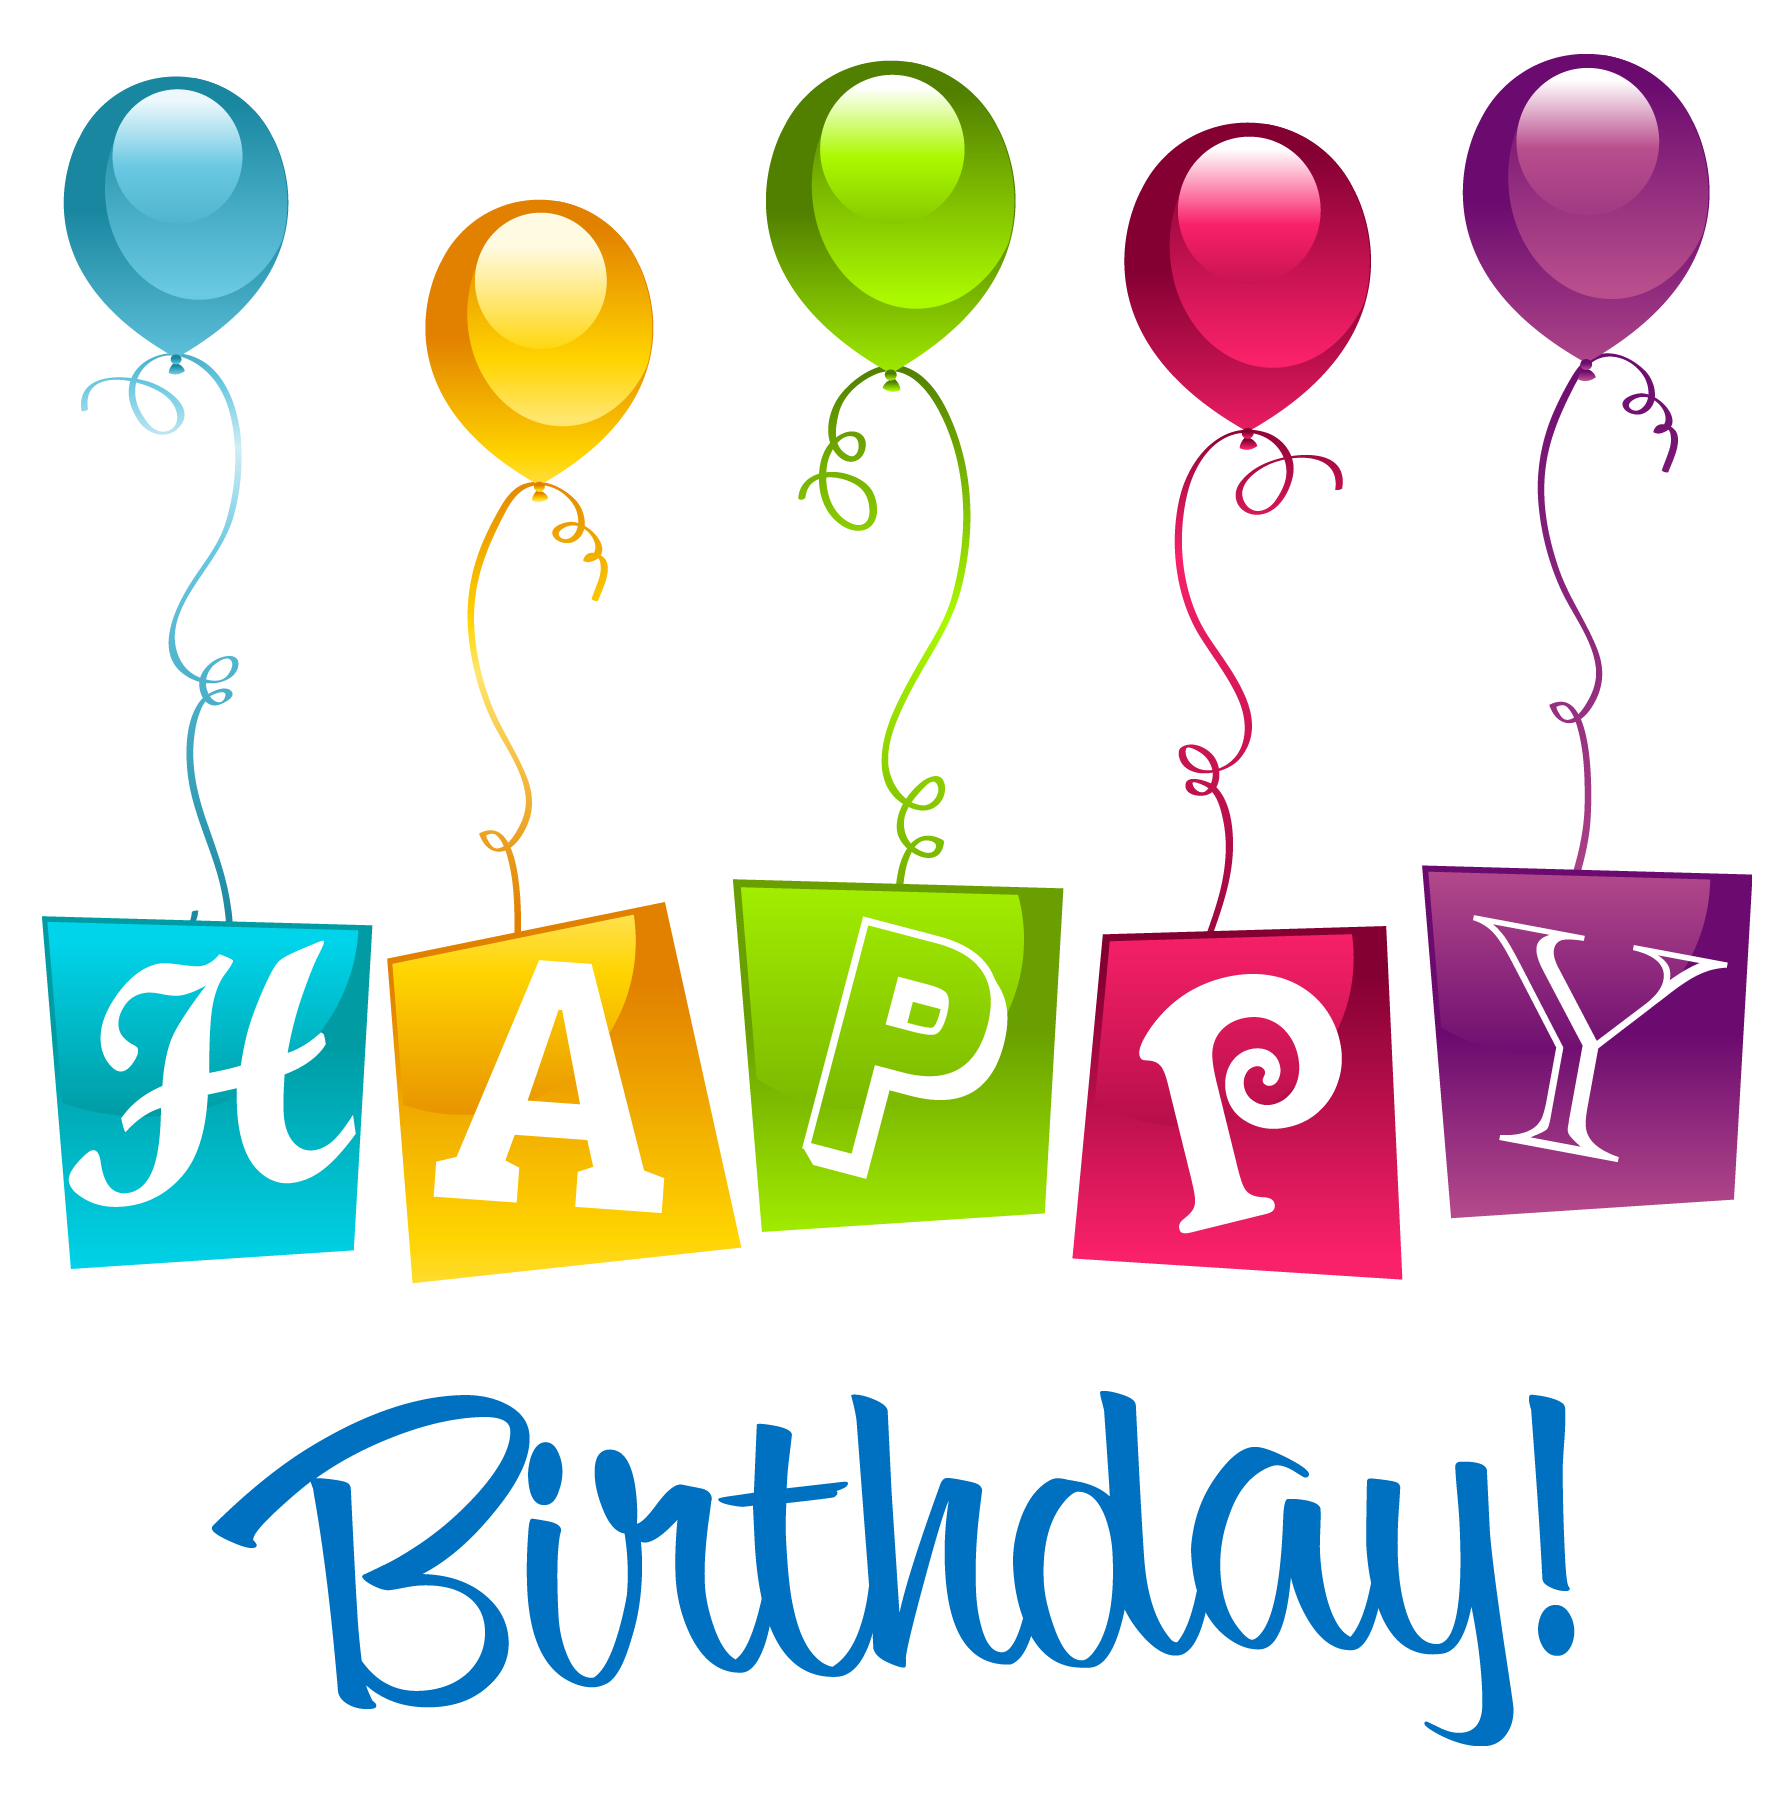 Happy Birthday Png Clipart Picture - Fun Birthday, Transparent background PNG HD thumbnail